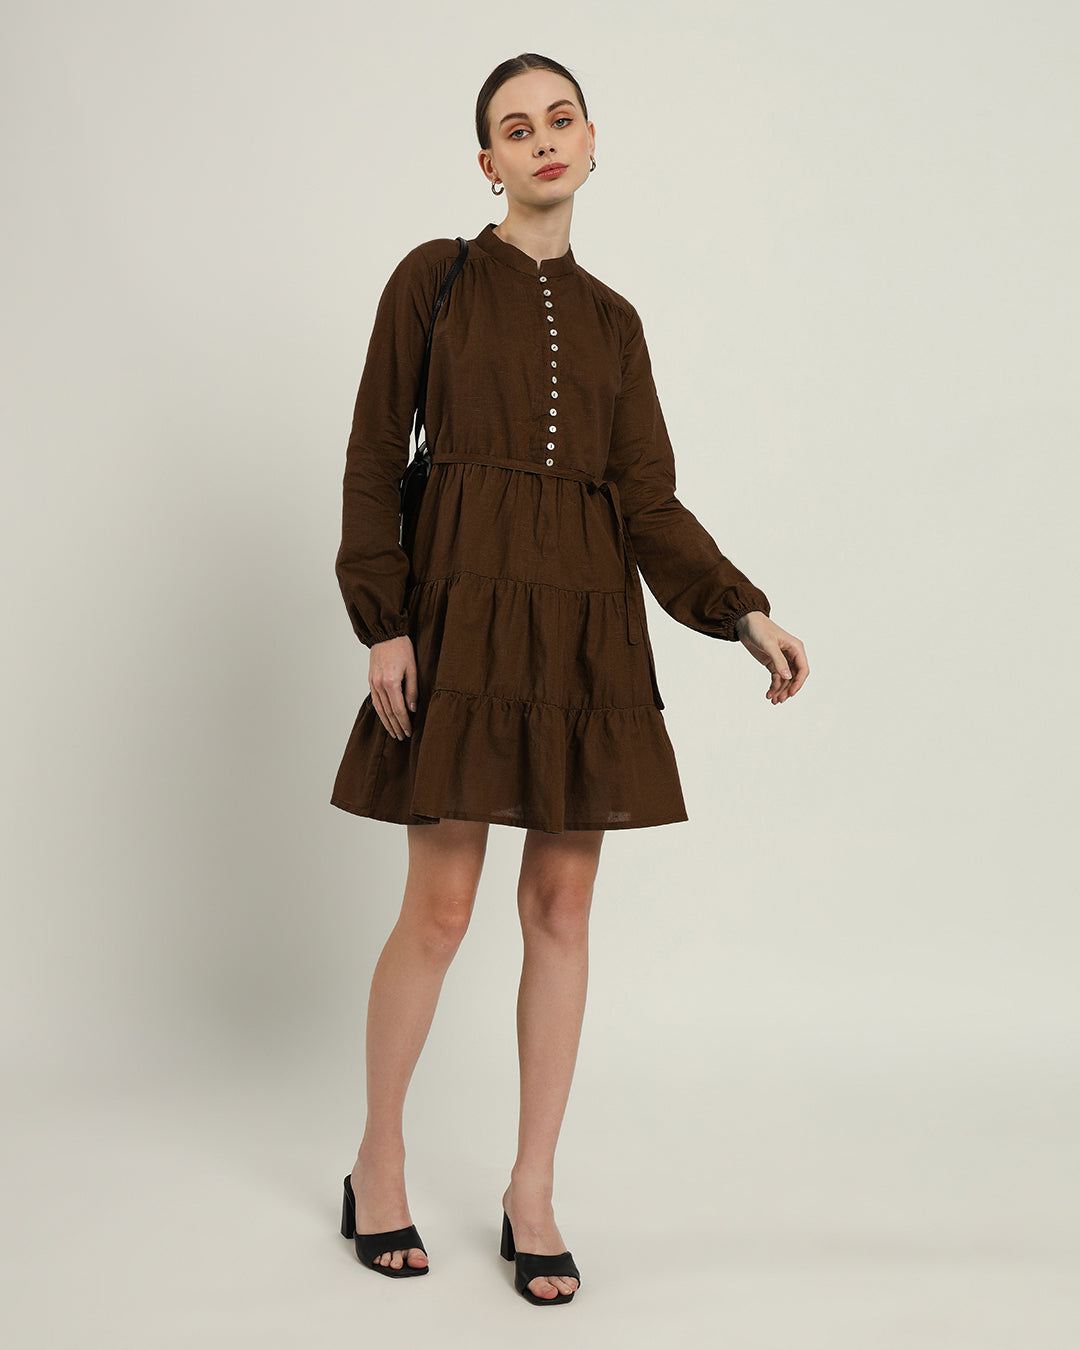 The Ely Nutshell Cotton Dress